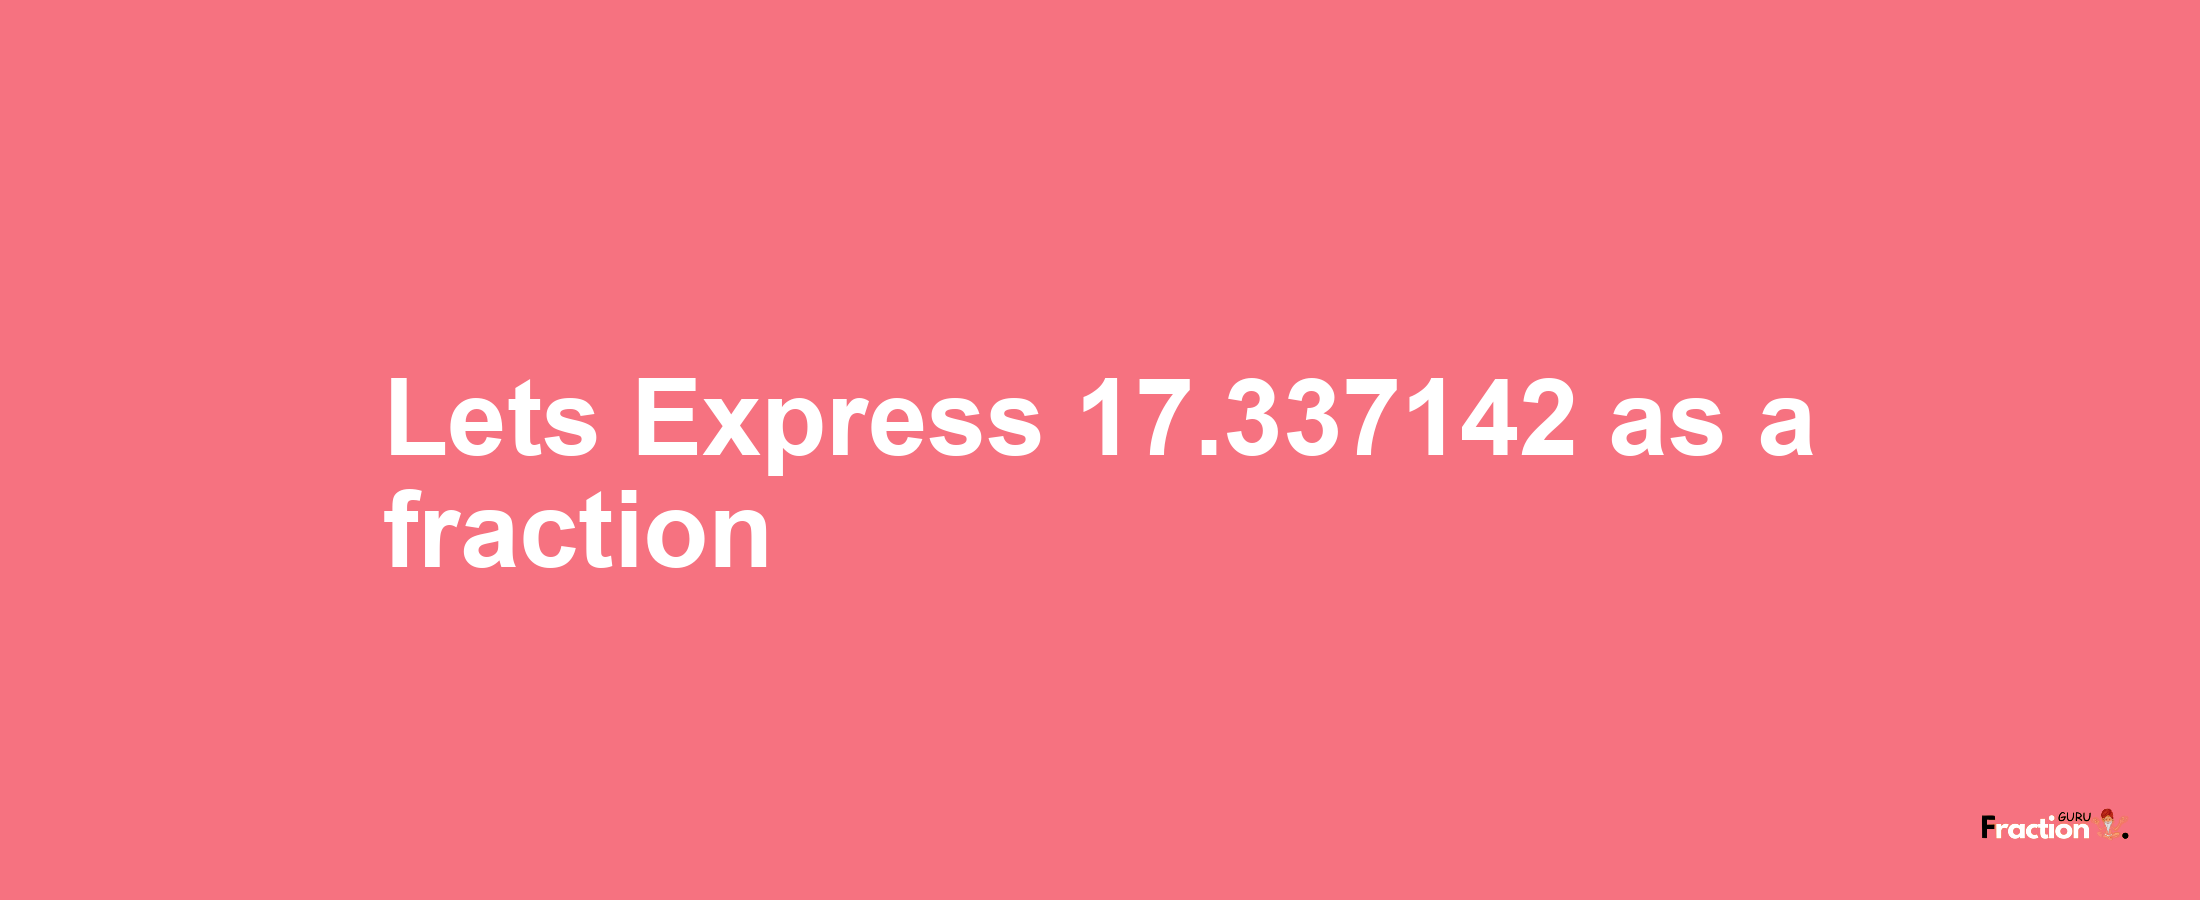 Lets Express 17.337142 as afraction